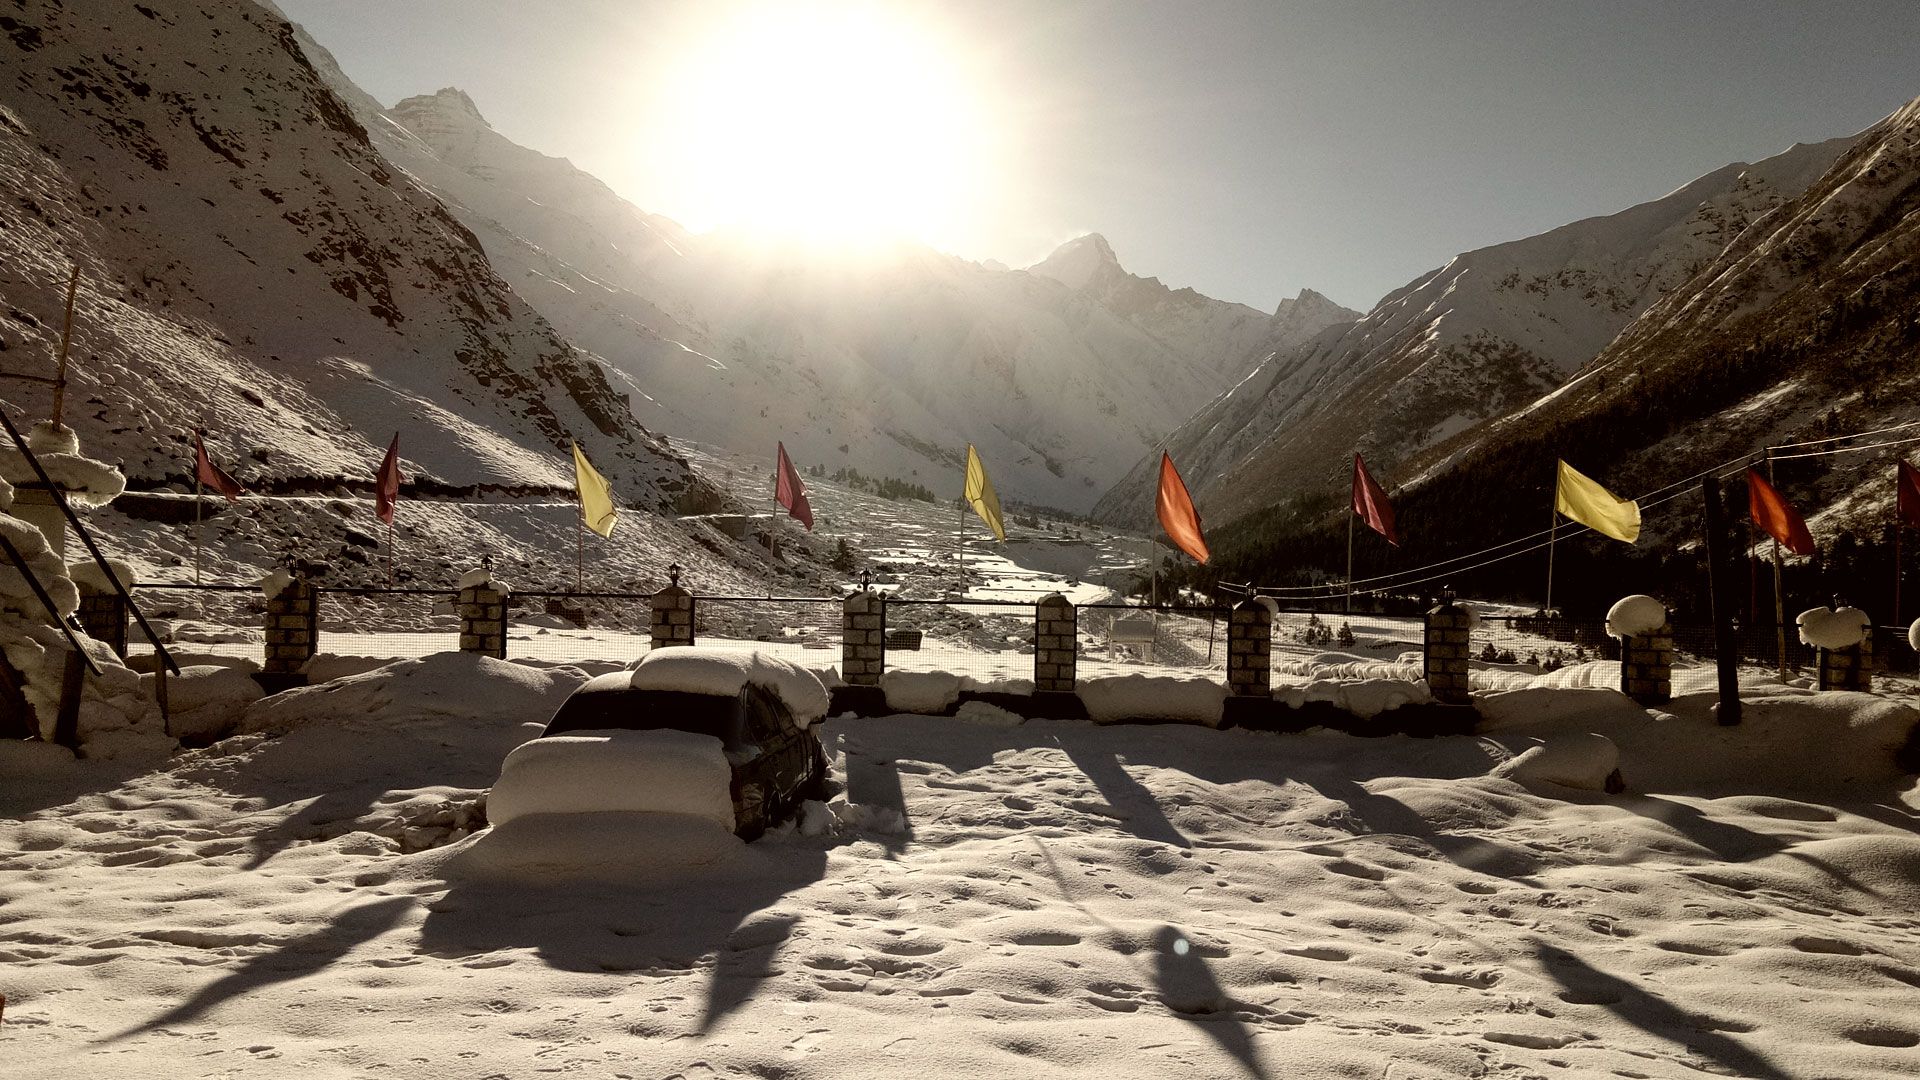 Chitkul - The diadem of Himachal